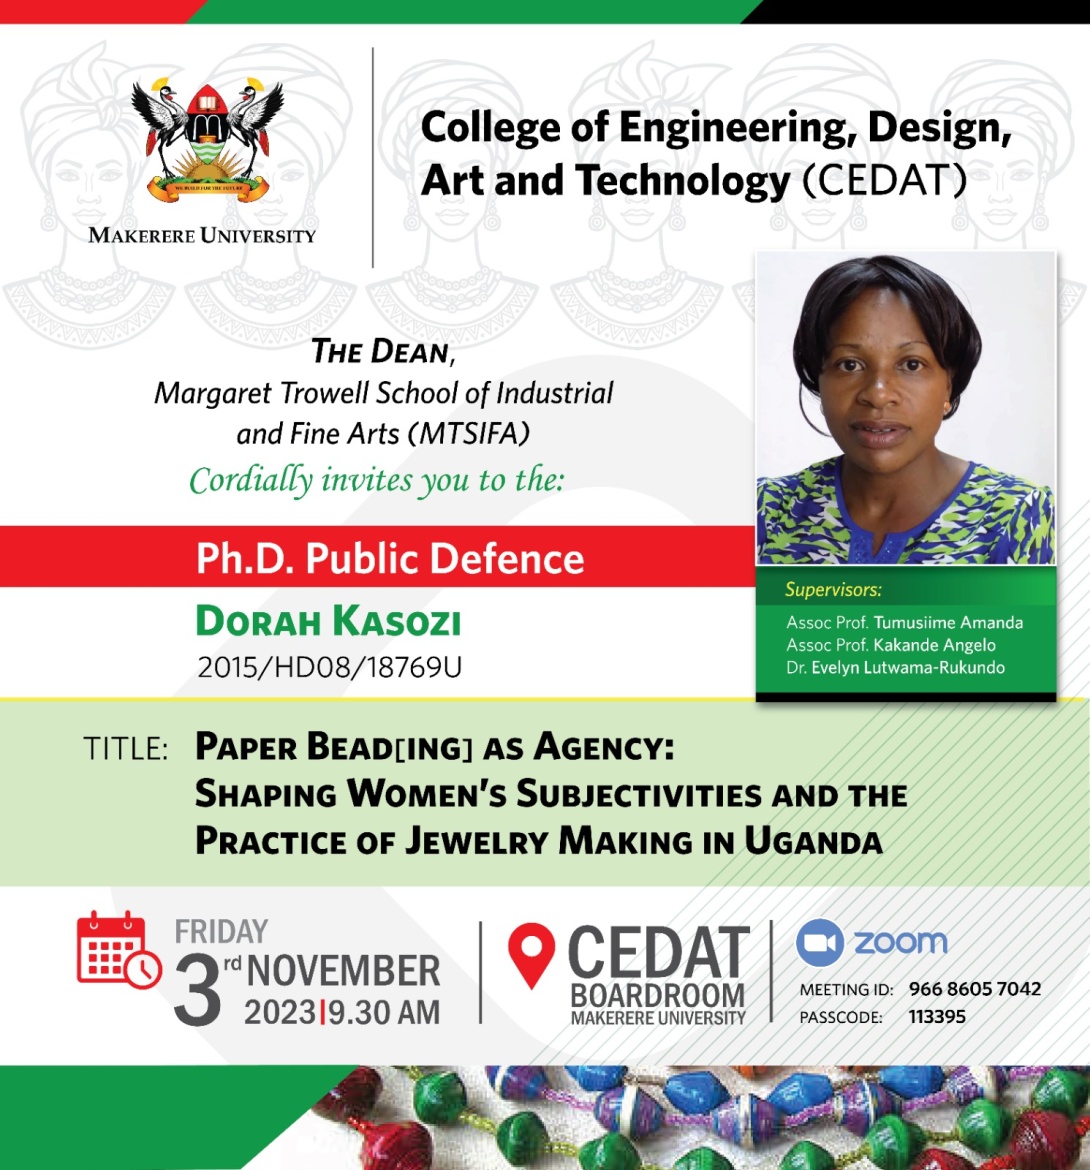 PhD Defence: Ms. Dorah Kasozi, "Paper Bead(Ing) as Agency: Shaping Women’s Subjectivities and the Practice of Jewelry-Making in Uganda", 3rd November, 2023 starting 9:30 AM EAT, The Board Room, Level 5, Next to the Principal’s Office, CEDAT, Makerere University, Kampala Uganda, East Africa and on ZOOM.